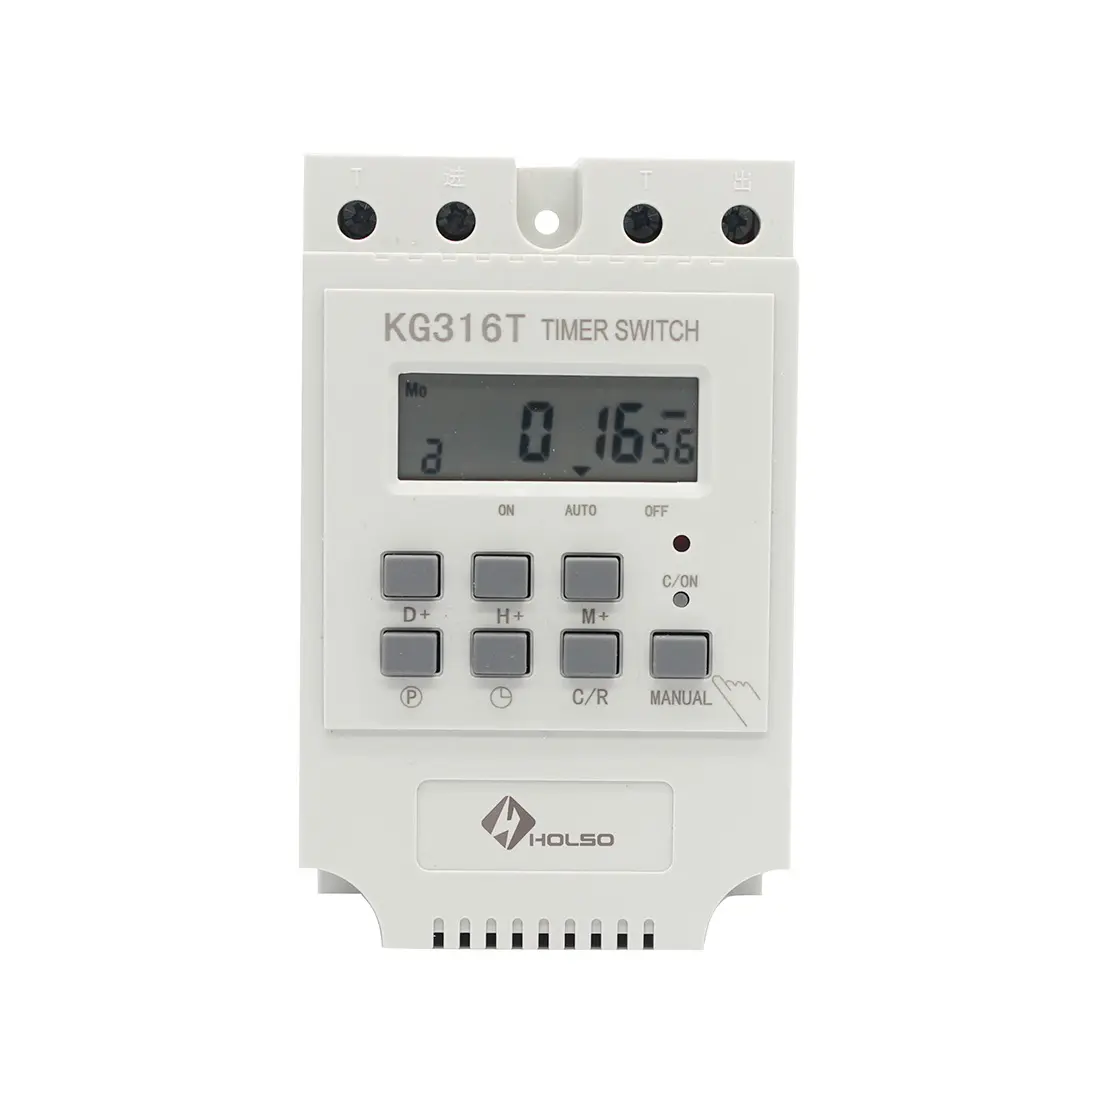 AC DC Customizable Timer Switch KG316T Customized Free Logo Standard 30A High Current Maximum 60A 50/60hz 220V LCD Industrial